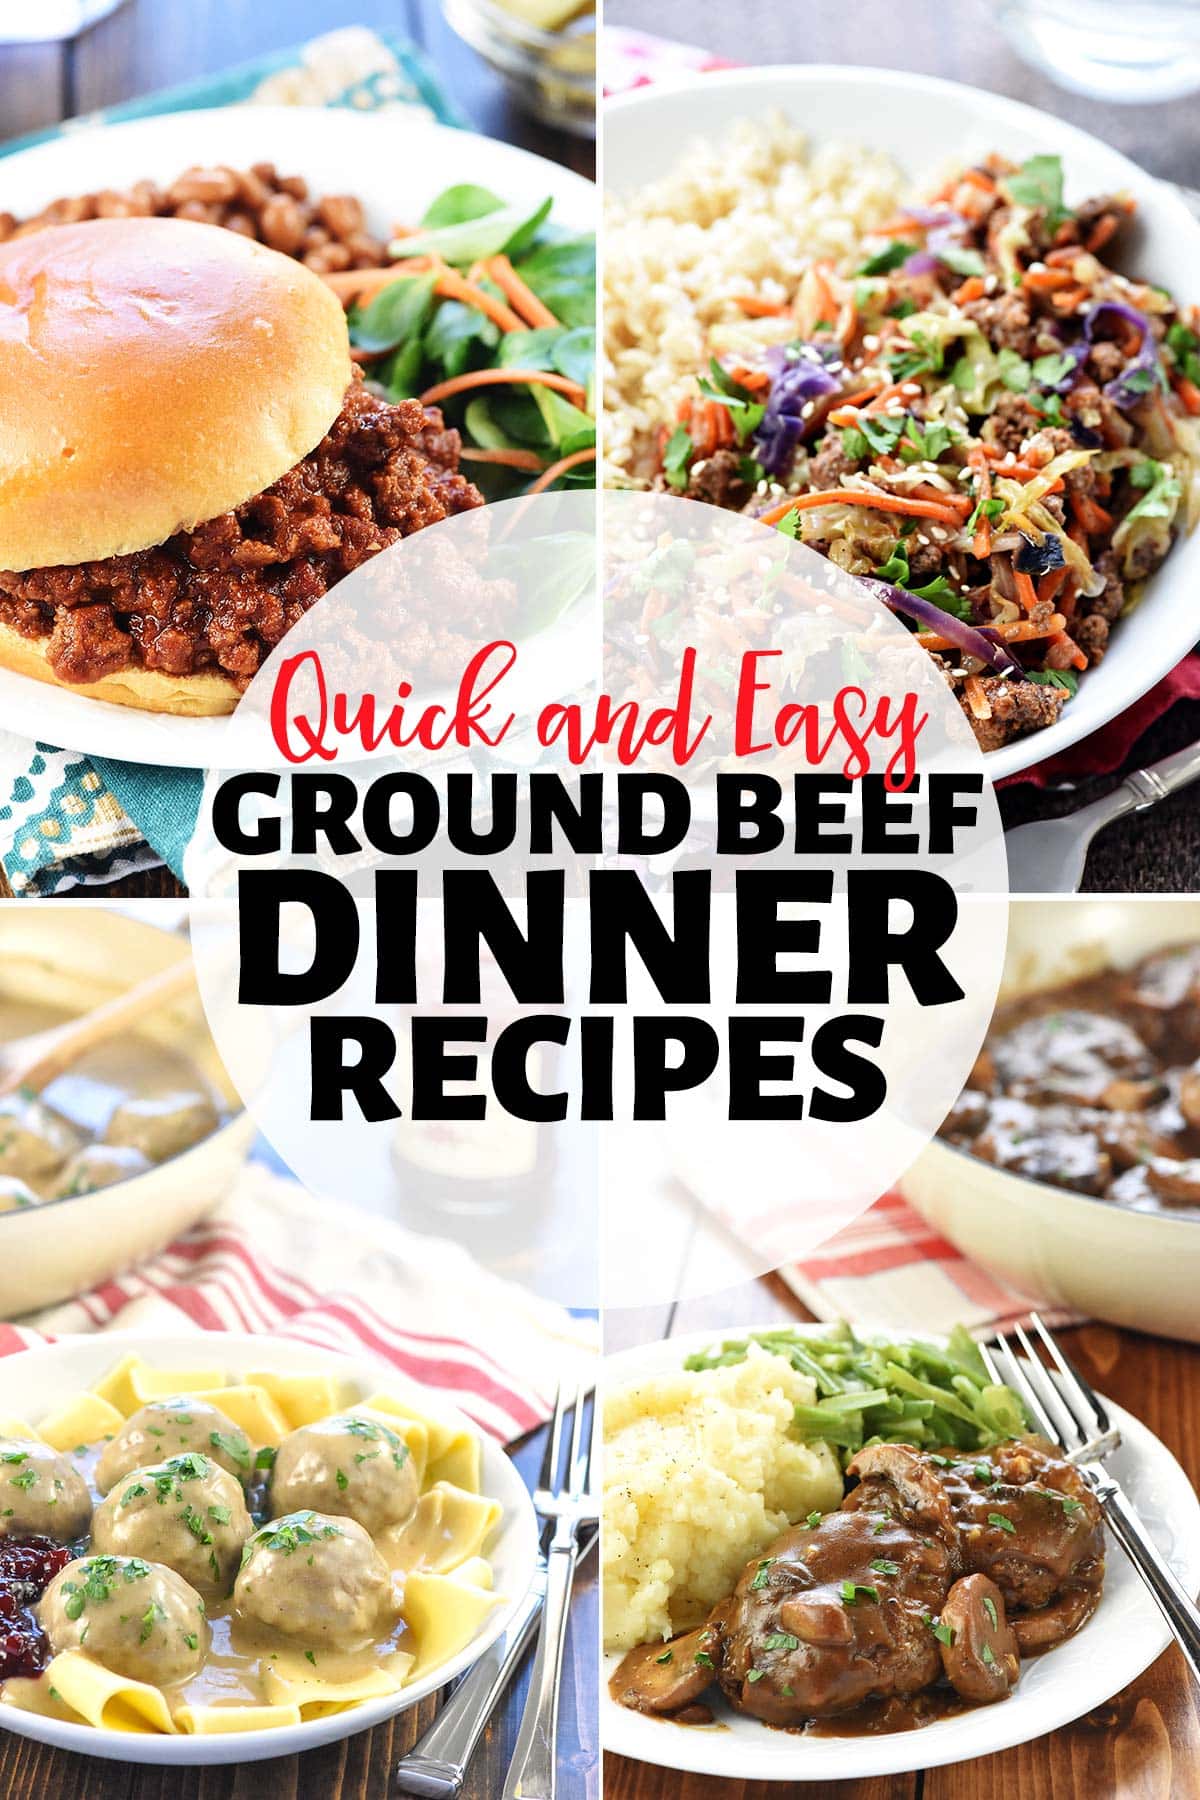 Ground Beef Dinner Ideas ~ this amazing collection of dinner recipes with ground beef includes dozens of quick, easy, family-friendly, and absolutely delicious ground beef recipes! From one-pot skillet dinners to cozy casseroles to everything in between, these ground beef dinners are perfect for busy weeknights! | FiveHeartHome.com via @fivehearthome